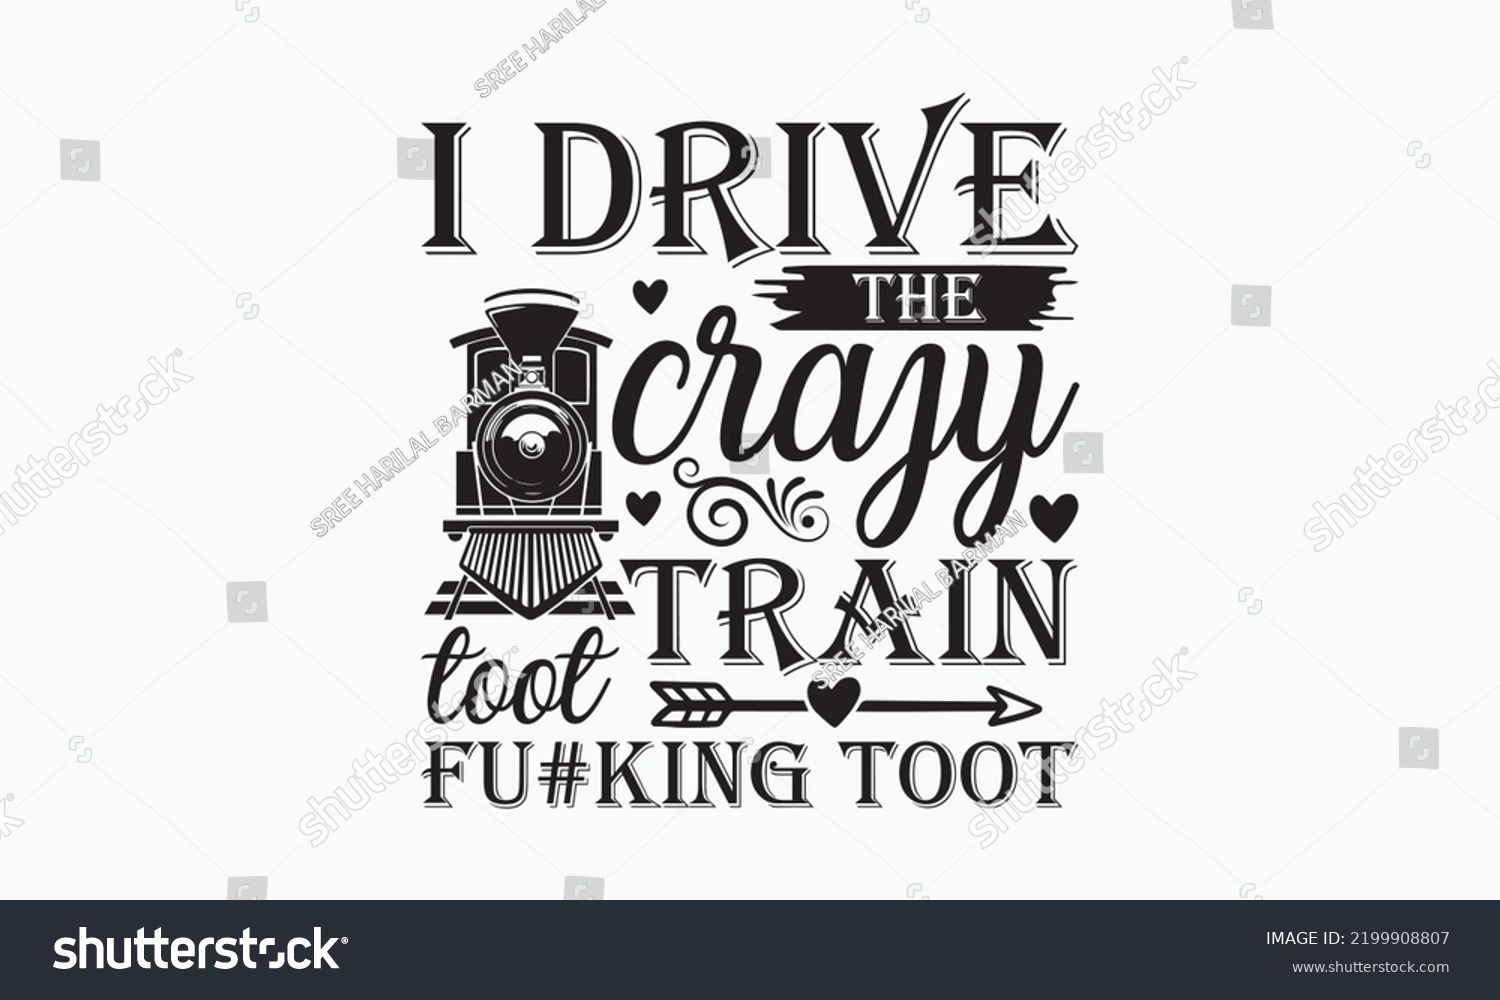 SVG of I drive the crazy train toot fu#king toot - Train SVG t-shirt design, Hand drew lettering phrases, templet, Calligraphy graphic design, SVG Files for Cutting Cricut and Silhouette. Eps 10 svg